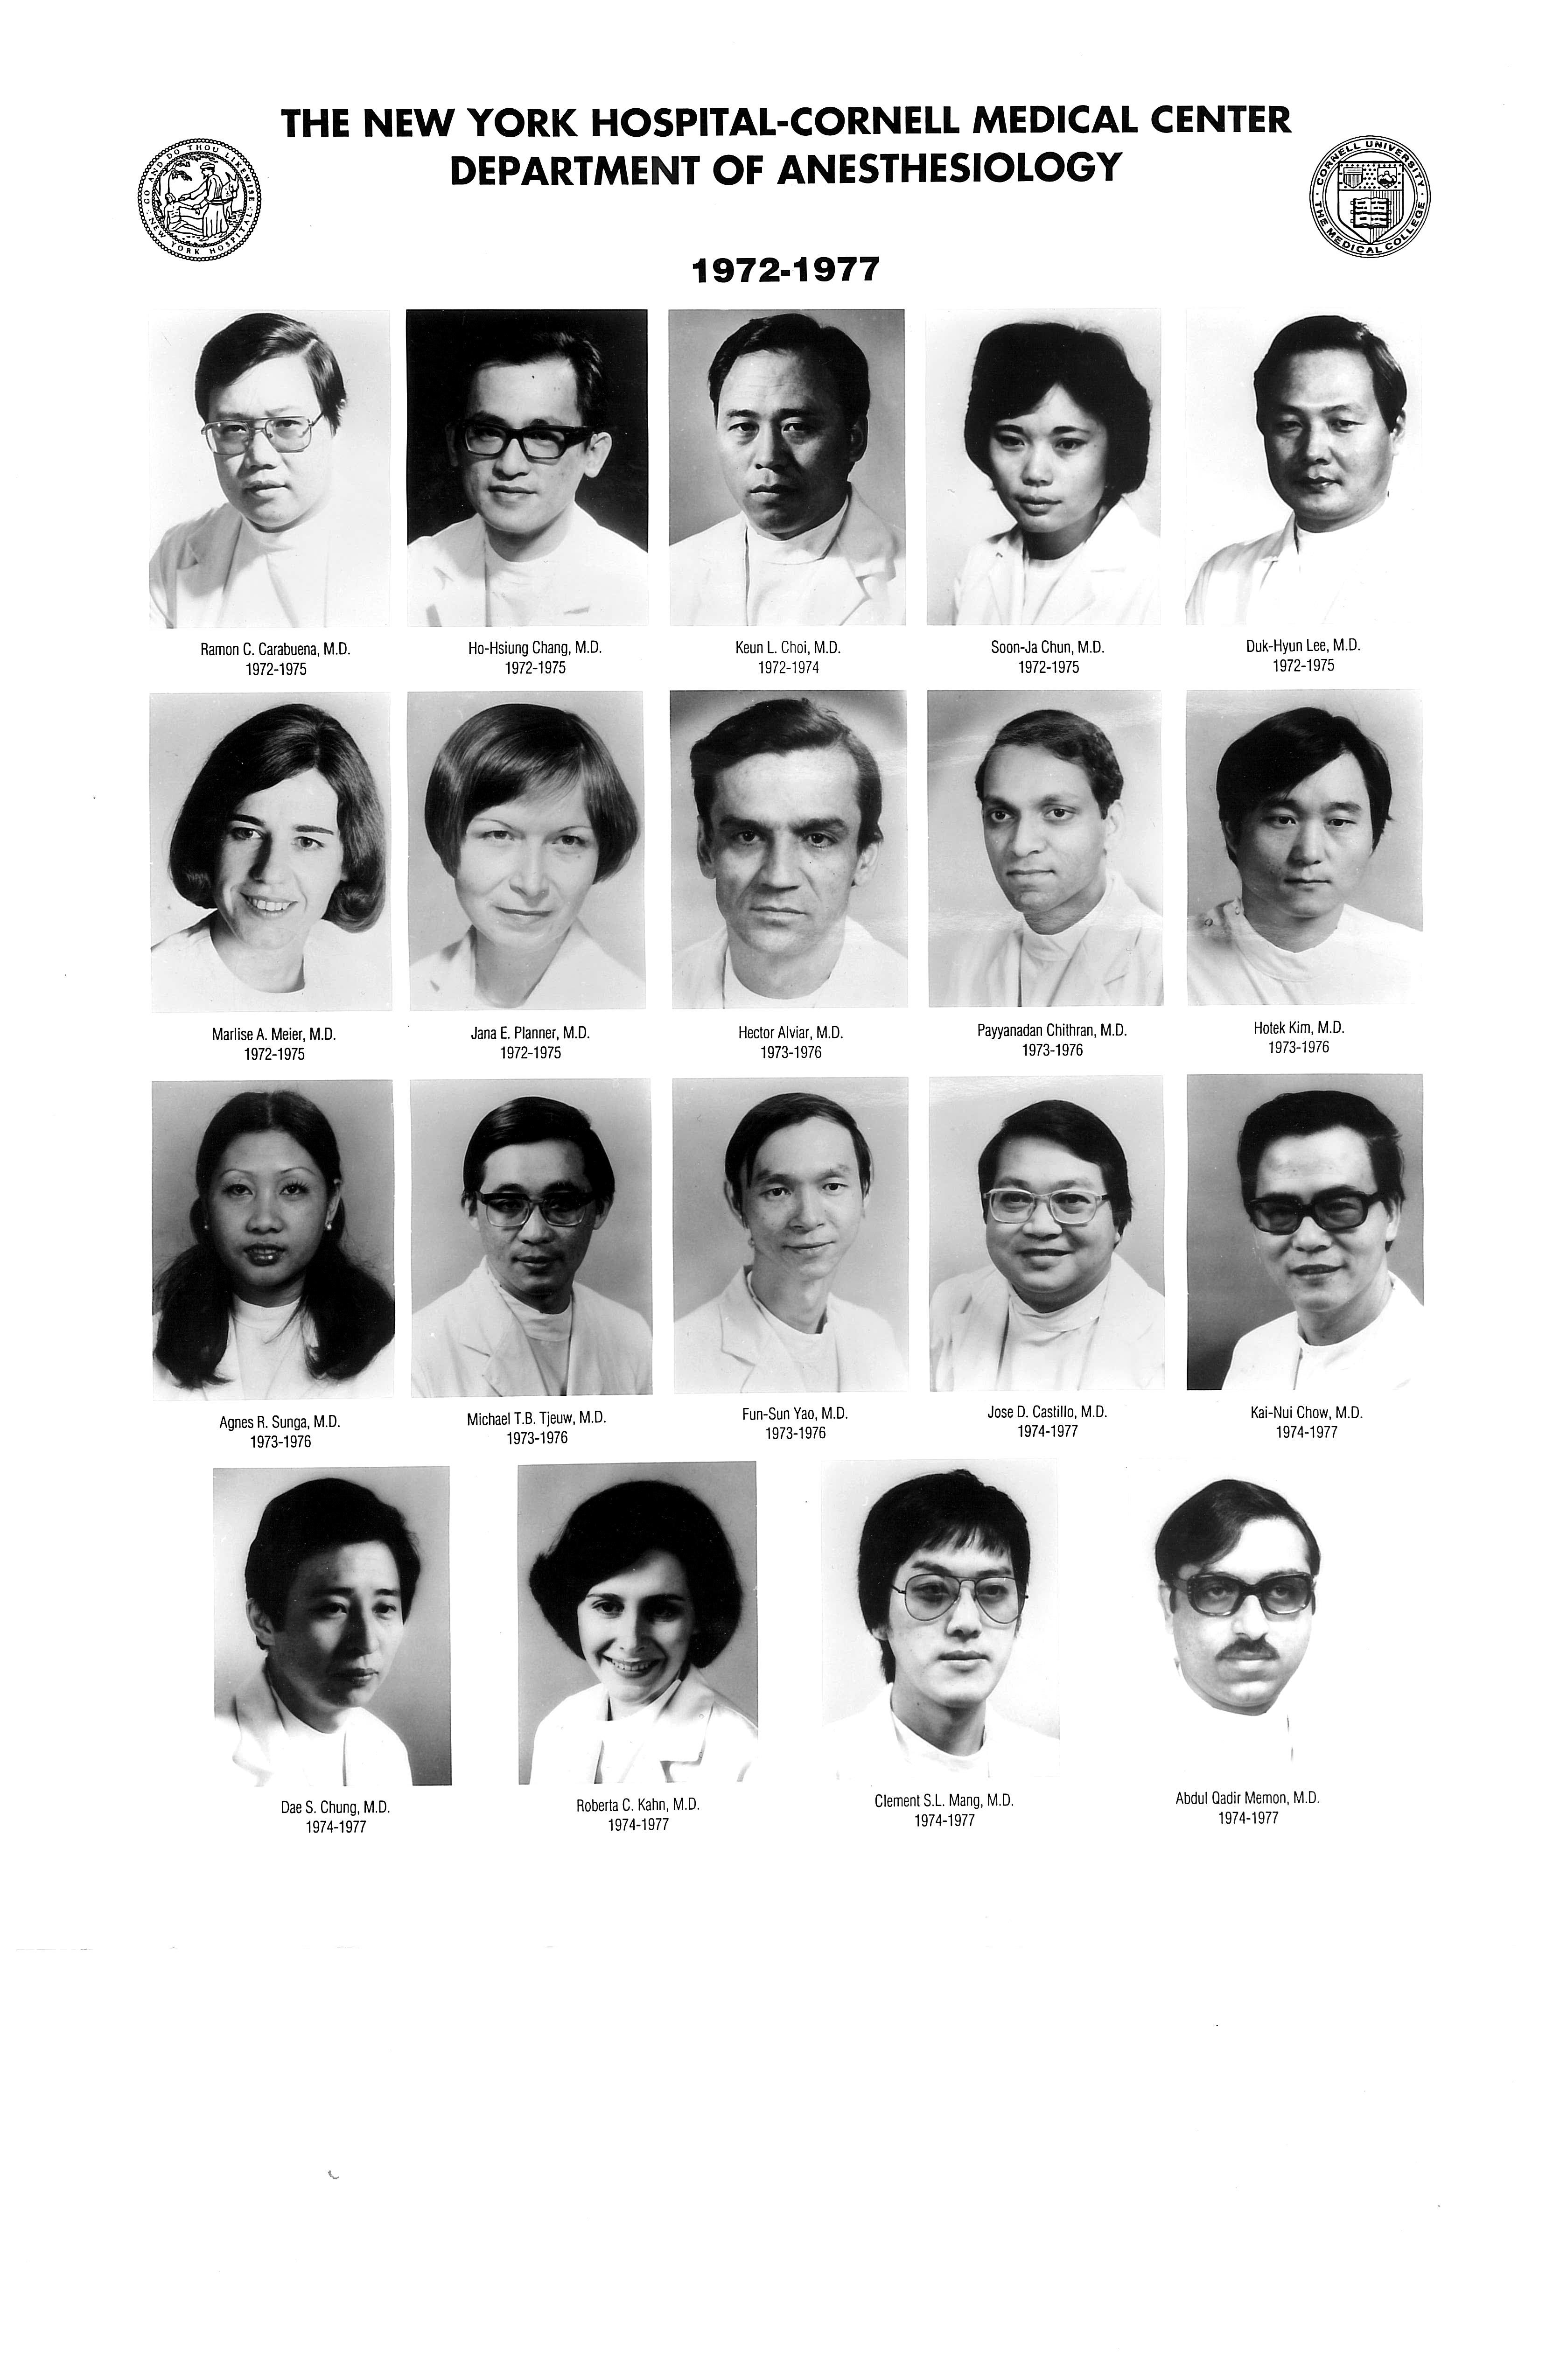 Department of Anesthesiology Class of 1972-1977